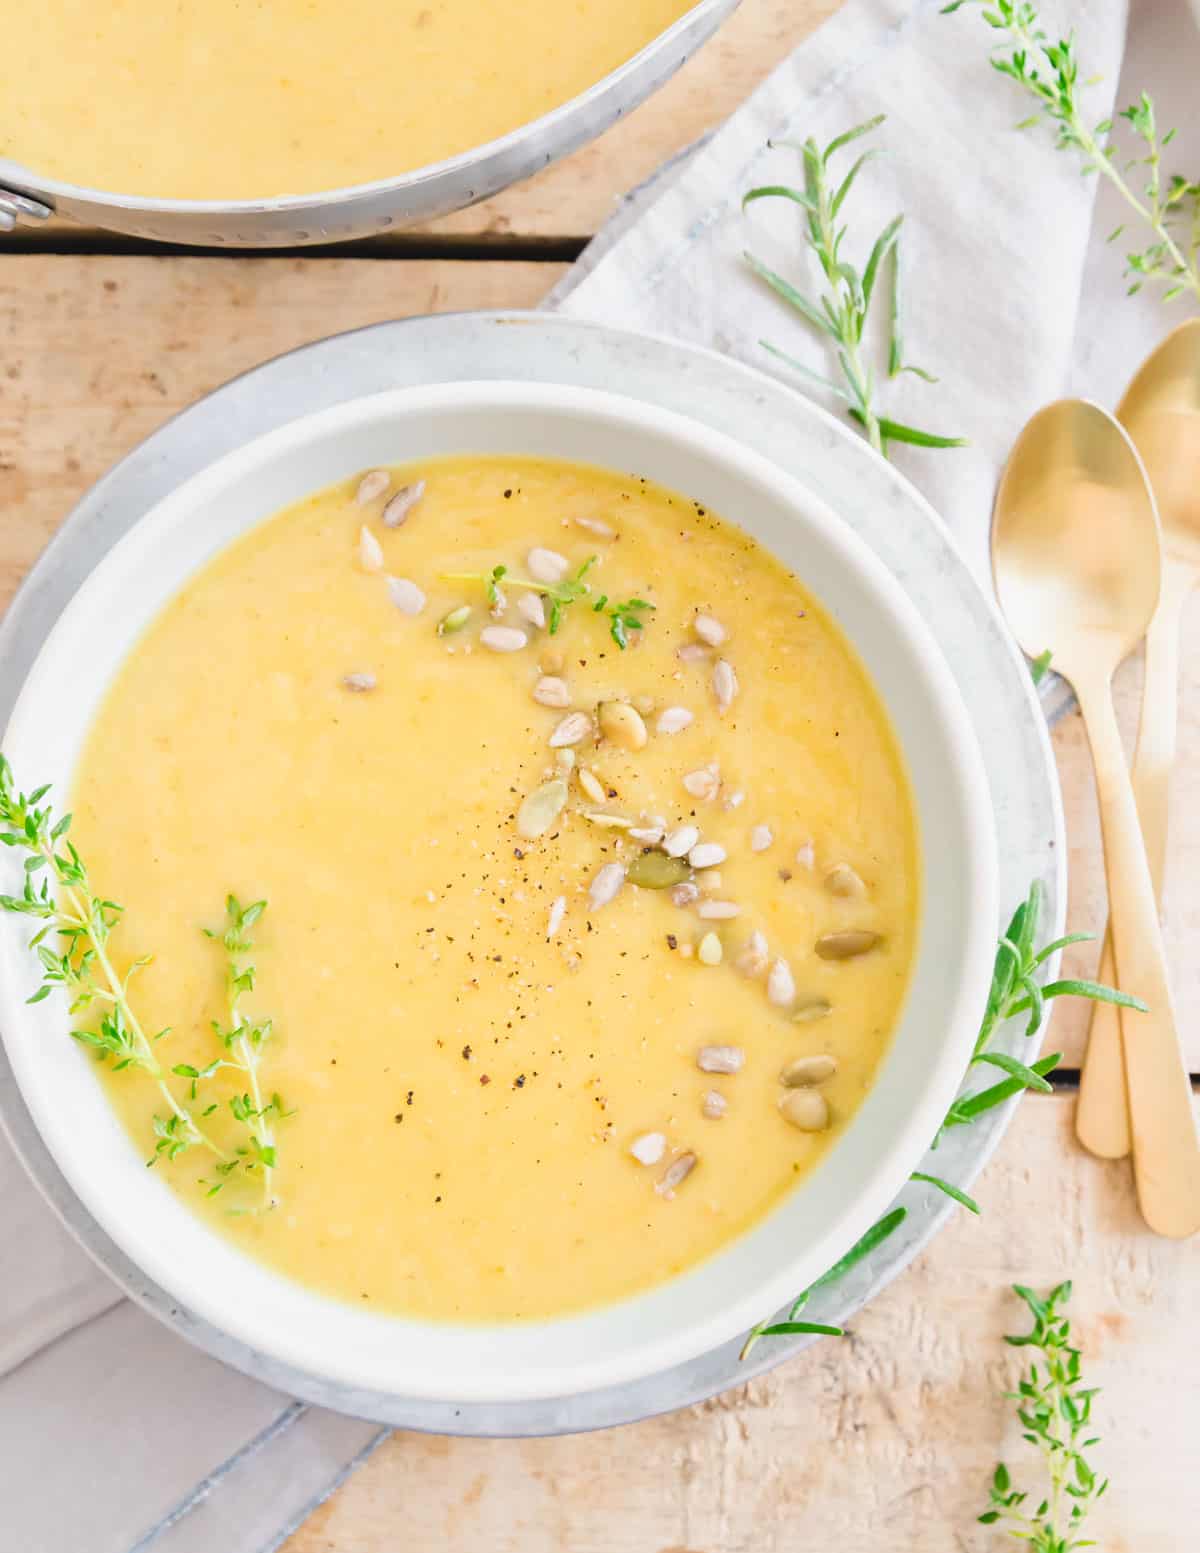 root vegetable soup made with parsnips, celery root and golden beets pureed until creamy